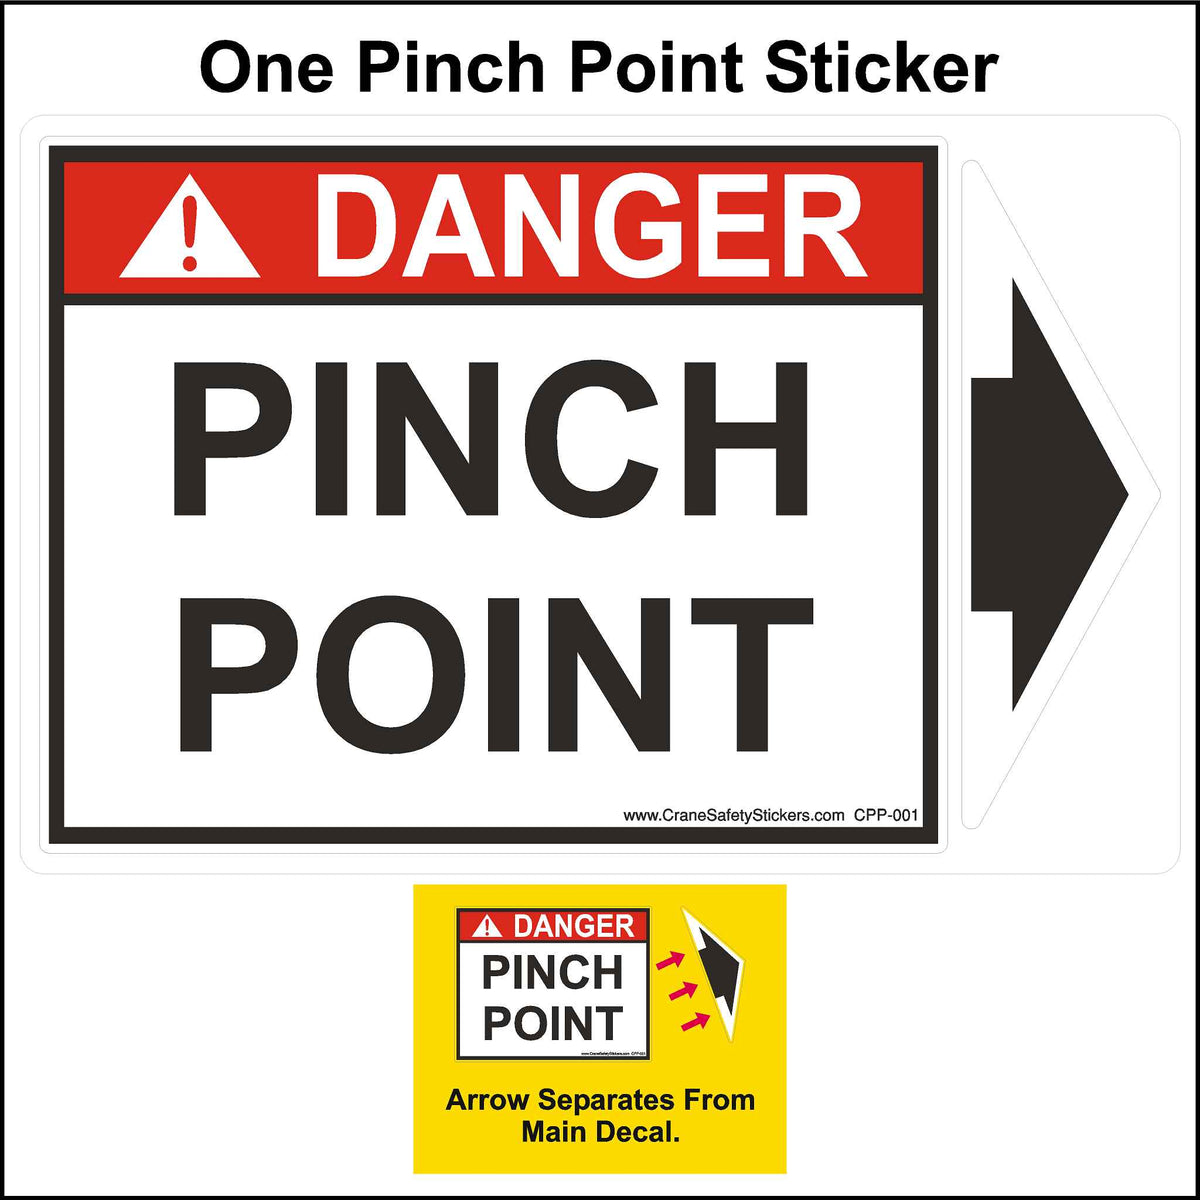 Pinch Point Stickers. Danger, Pinch Point. The Arrow is a separate sticker that you can turn and place anywhere.